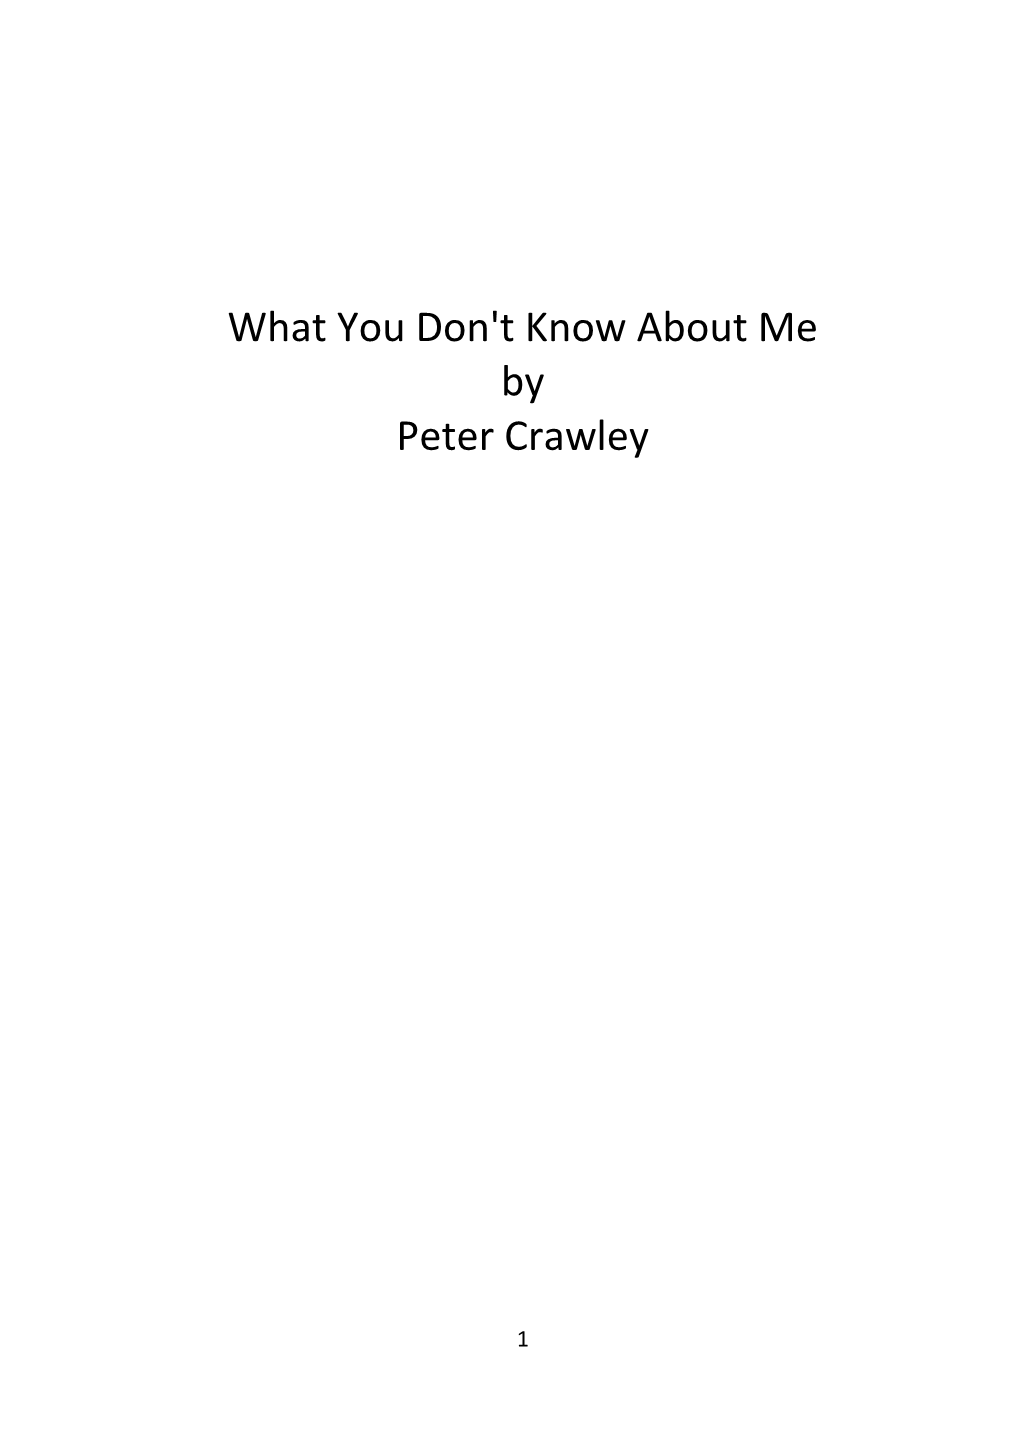 What You Don't Know About Me by Peter Crawley